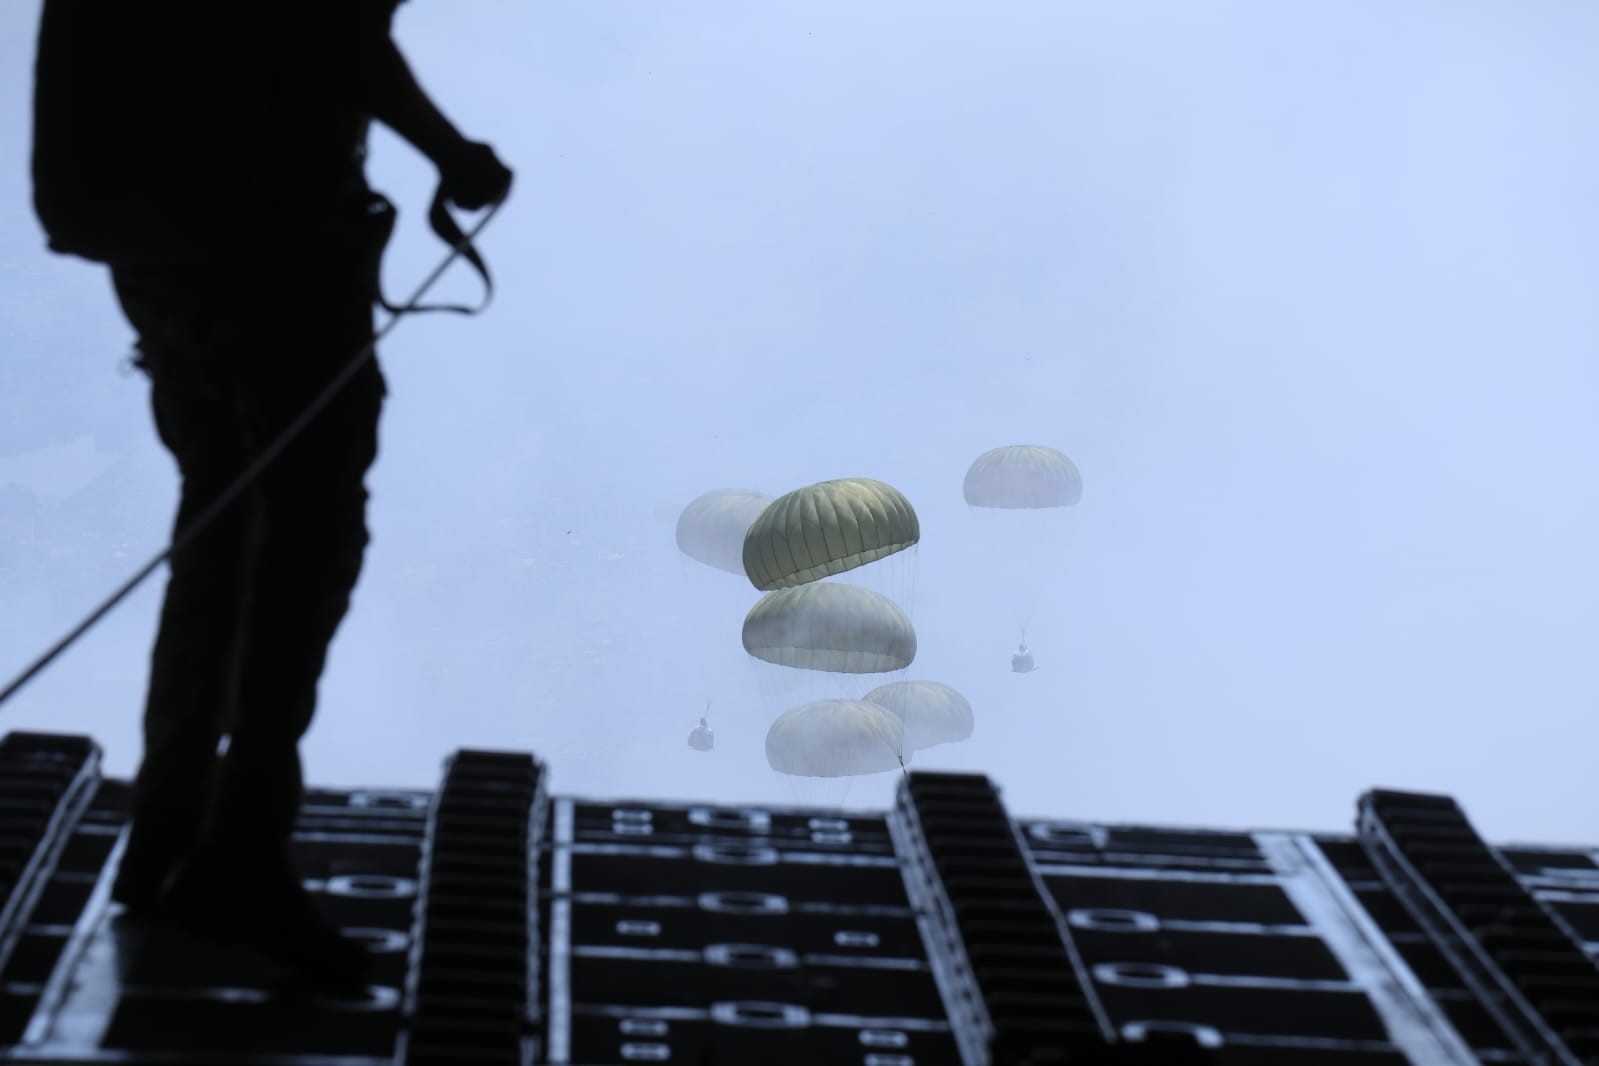 Army carries out 3 airdrops on Gaza with international participation 